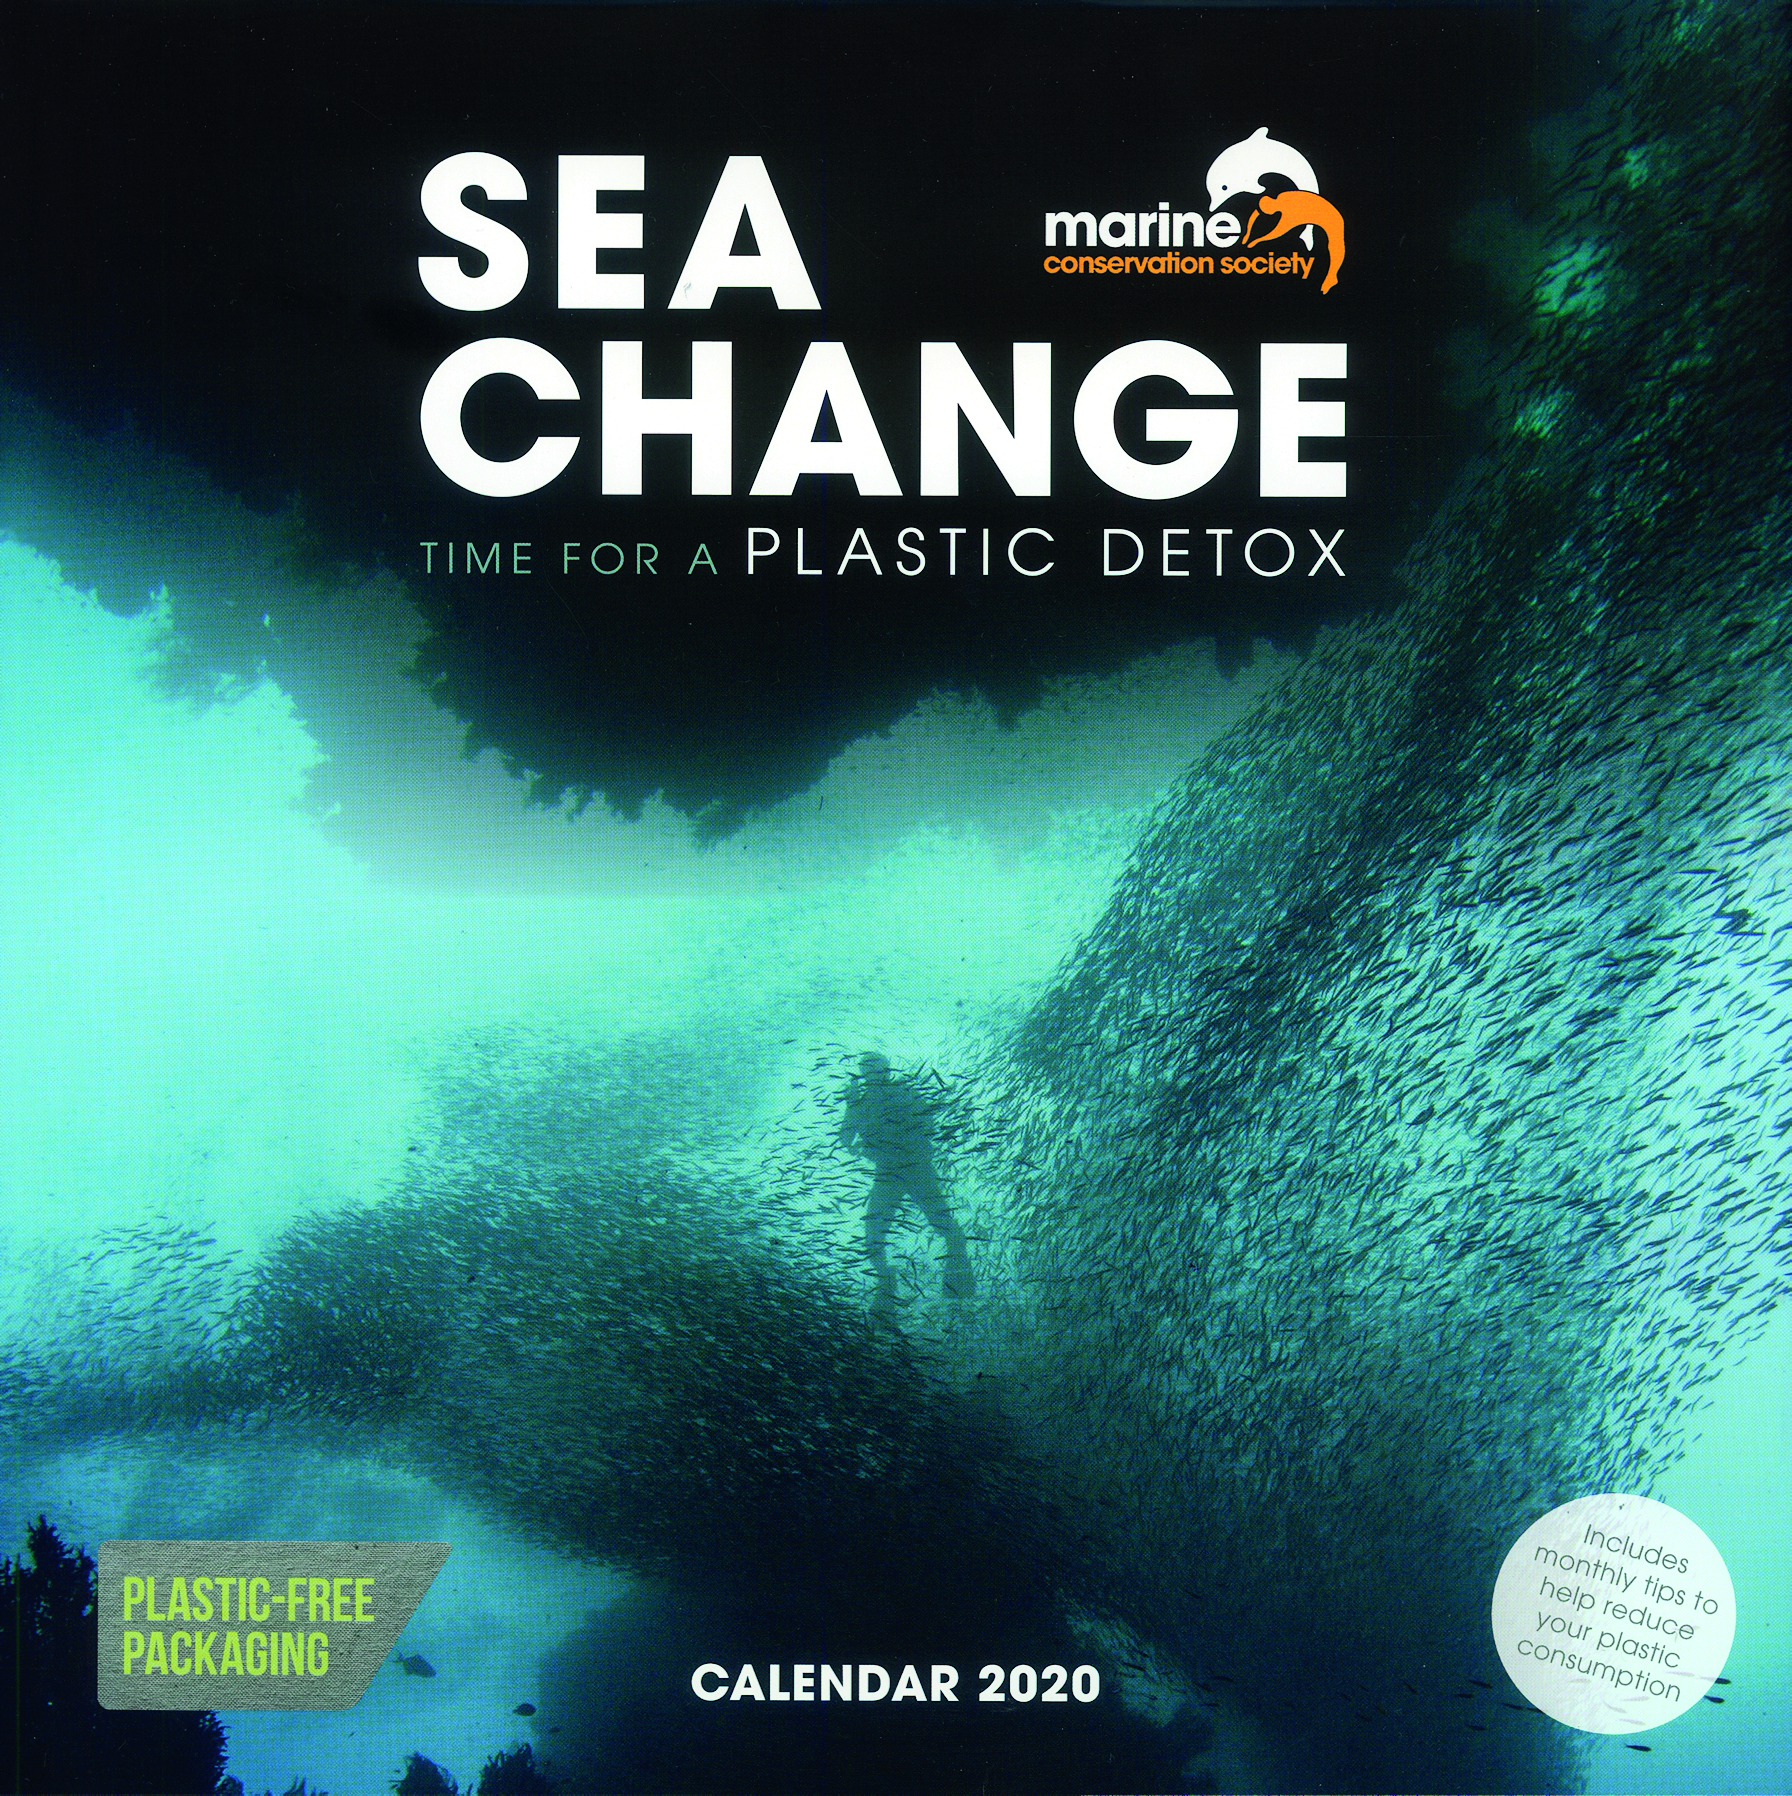 Above: Carousel Calendars’ Sea Change title for the Marine Conservation Society fanfares a new plastic-free packaging option. 